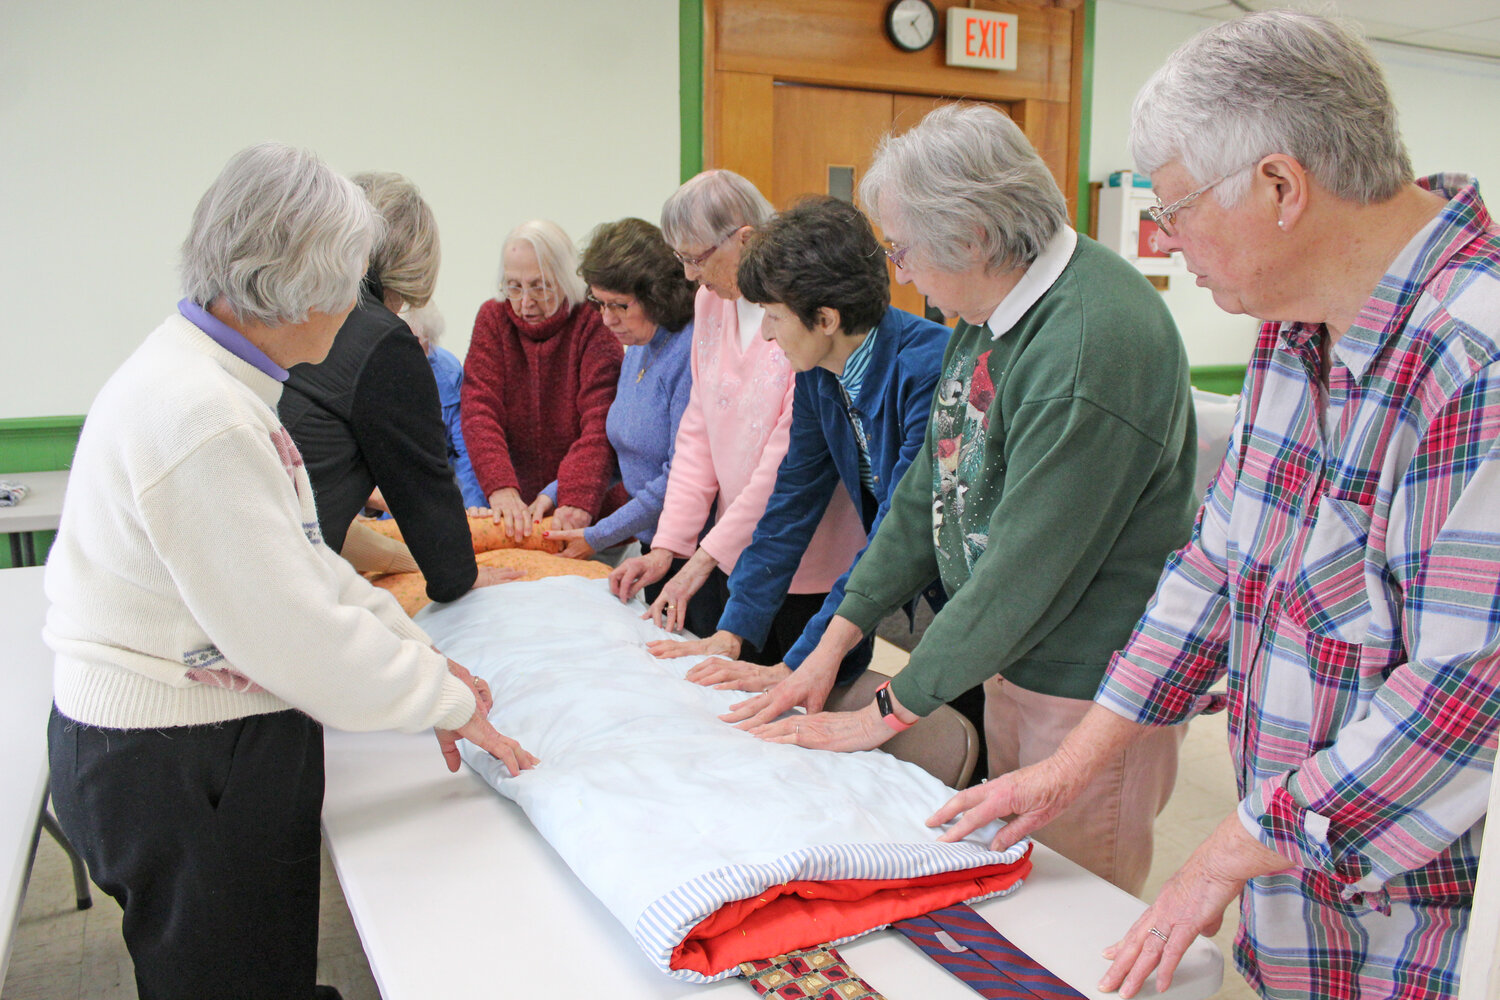 Members of My Brothers’ Keeper quilt group pray before tying up a sleeping bag at Dryden United Methodist Church, where they meet every Friday.